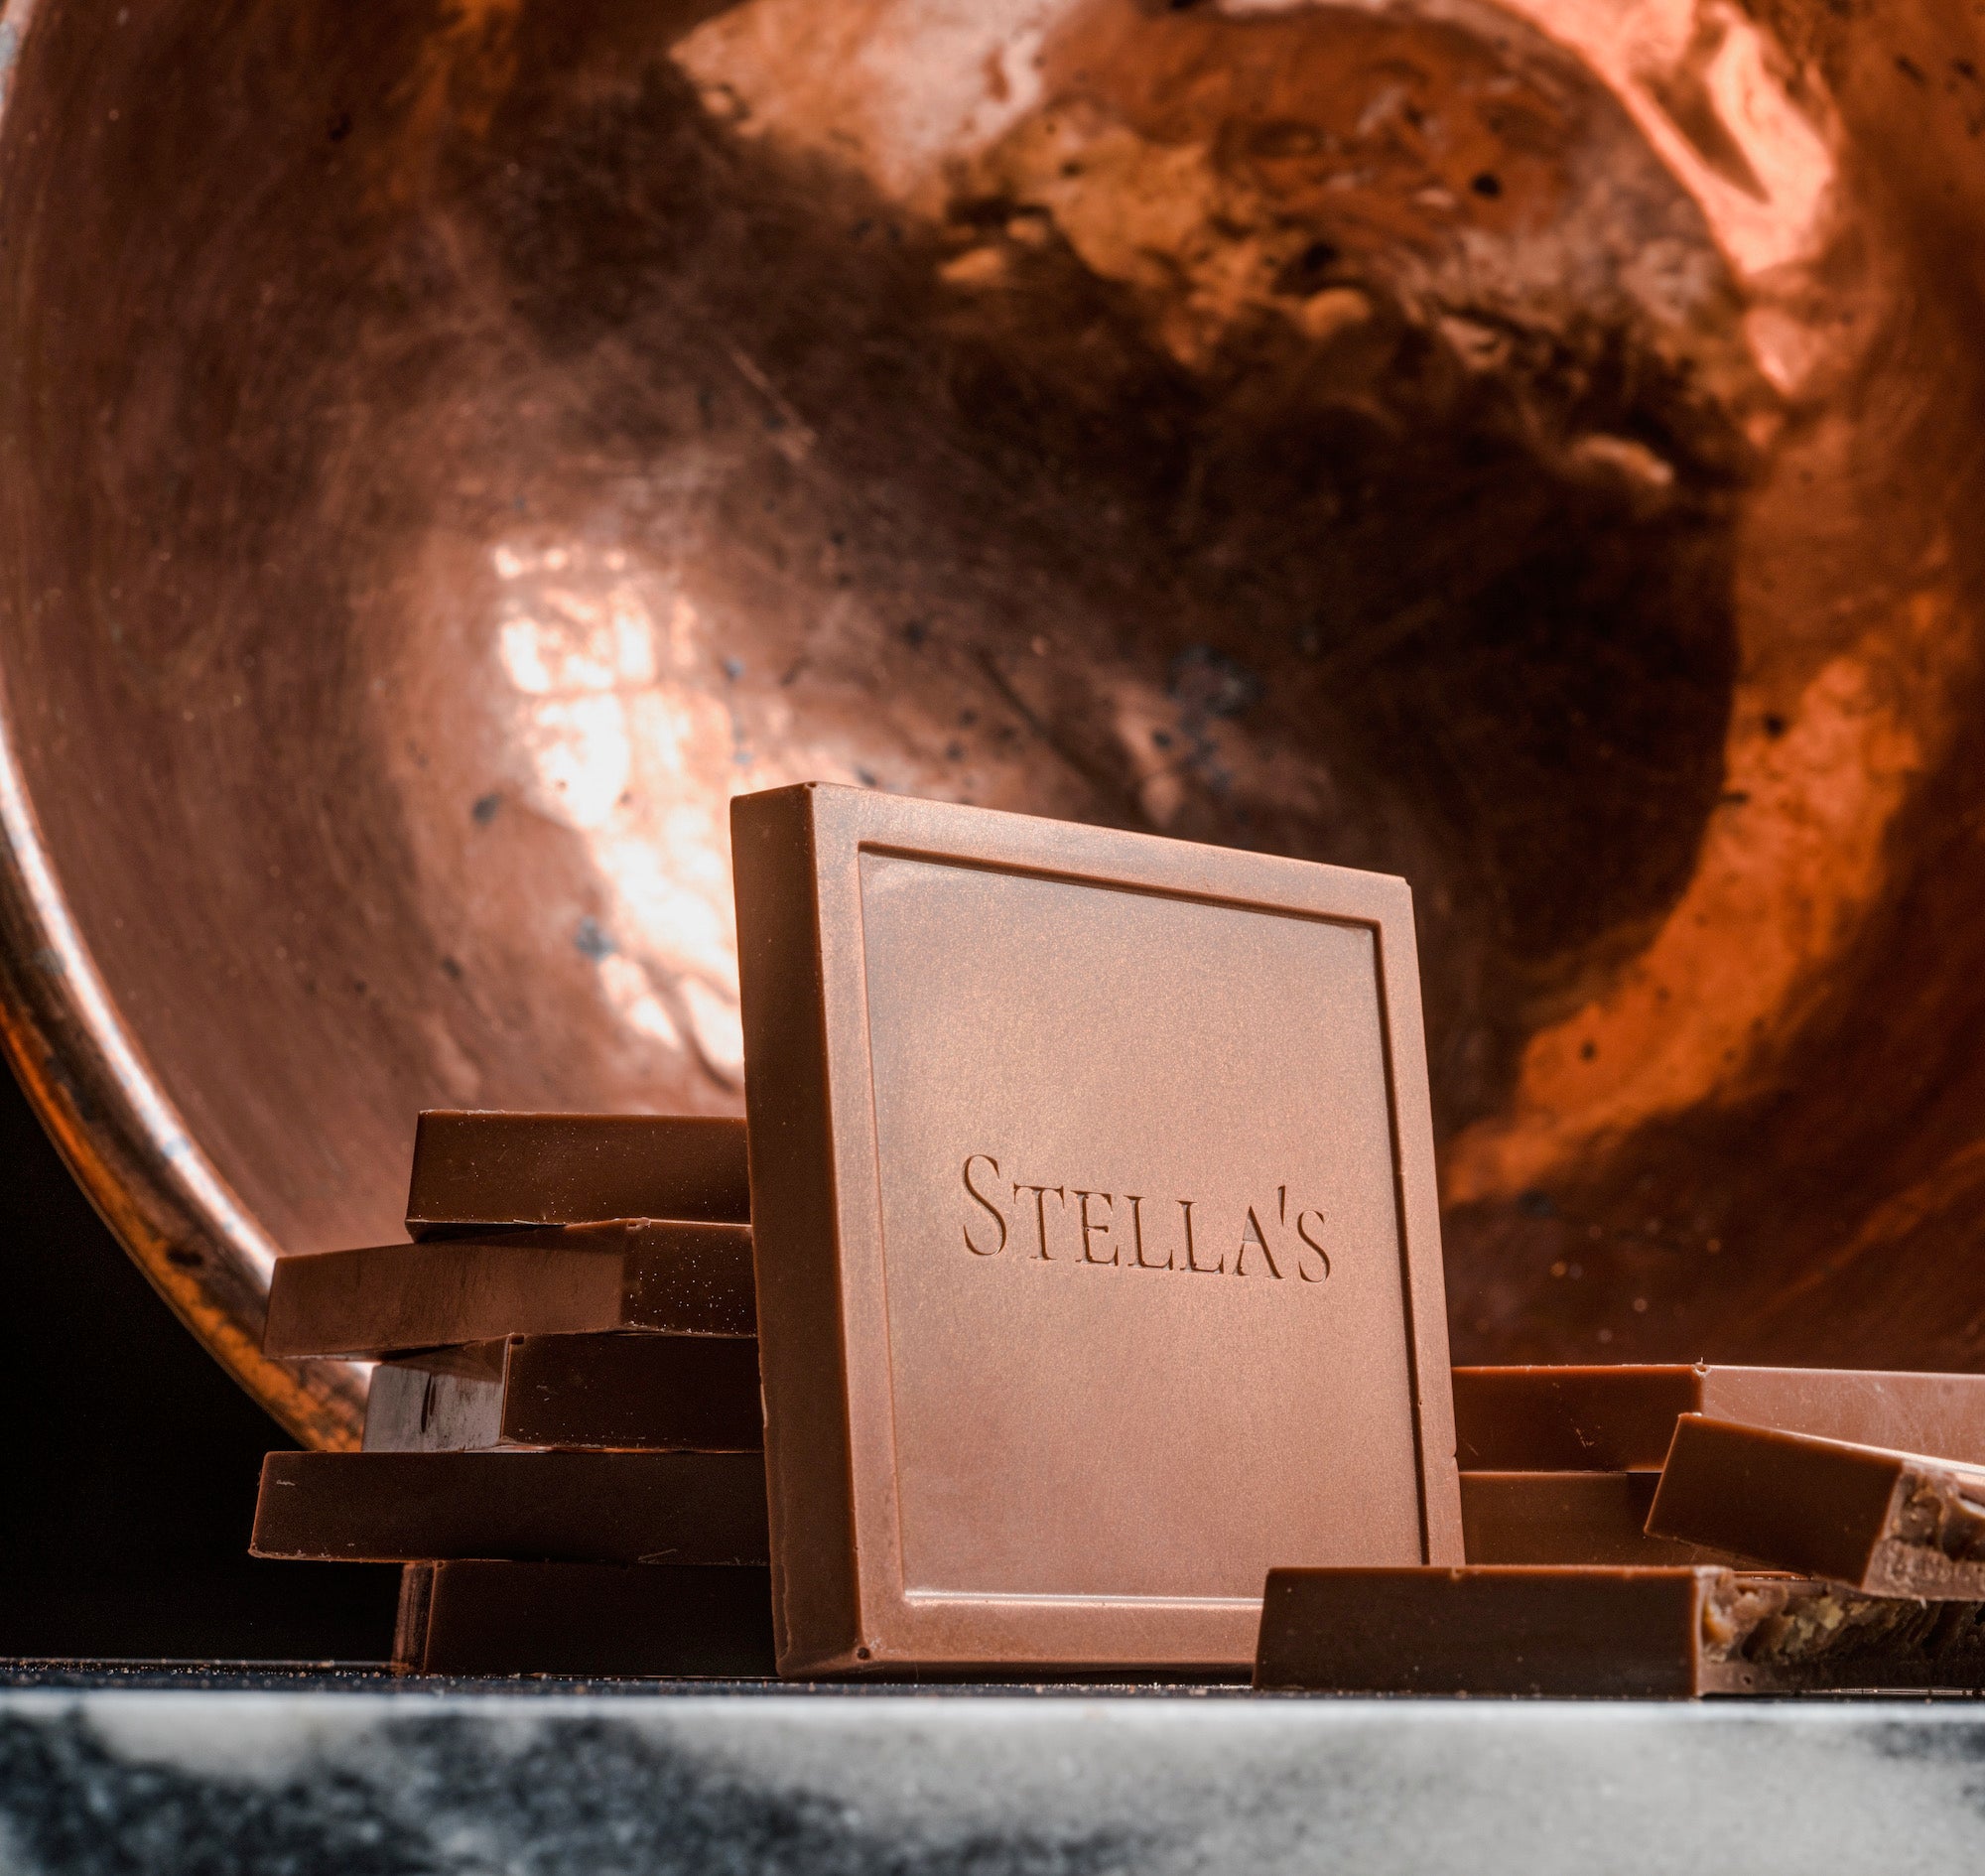 Stamped chocolate bar with Stella's logo